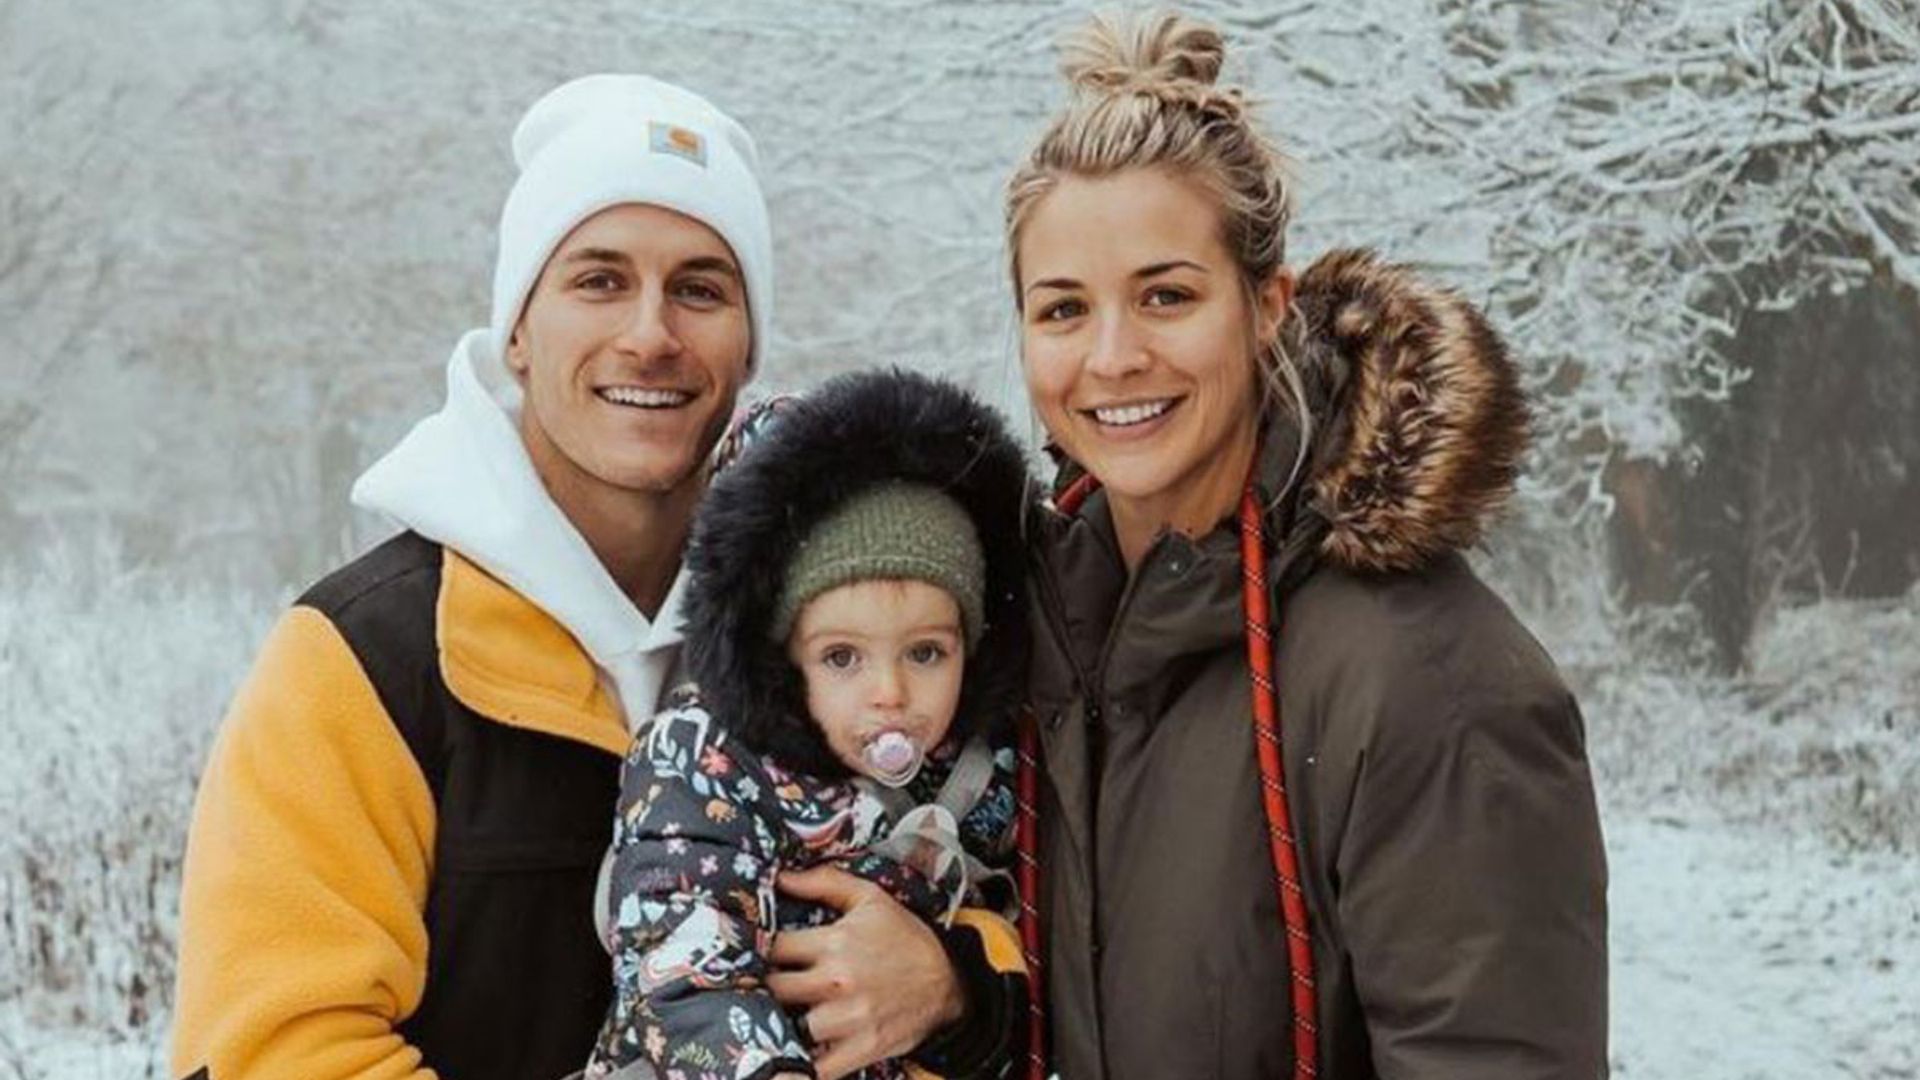 Gemma Atkinson and Gorka Marquez reveal proud moment with baby Mia